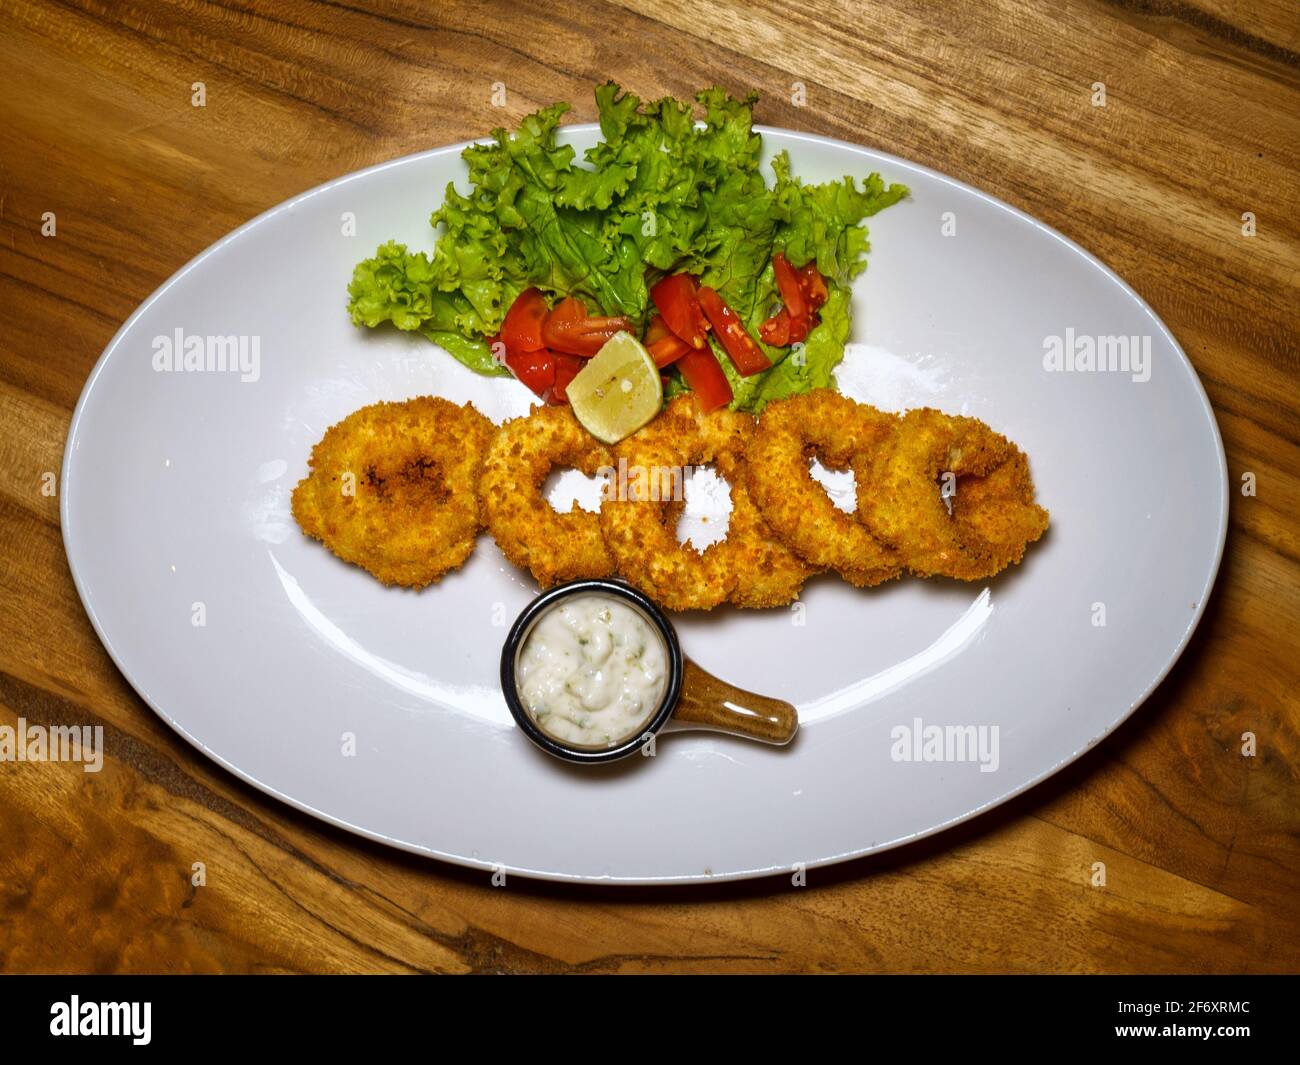 Overhead view of deep fried onion rings with tartar sauce Stock Photo